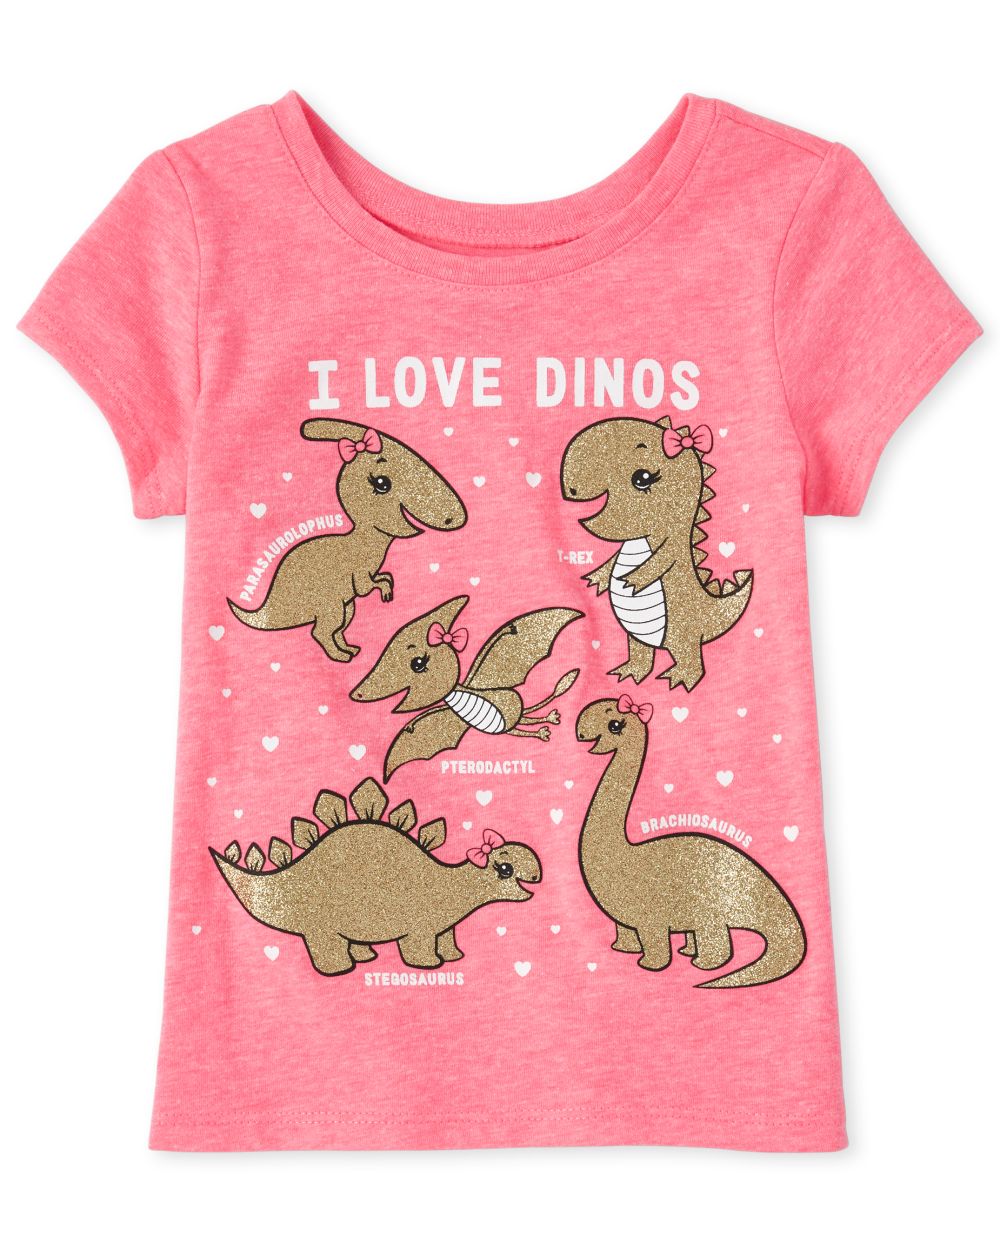 Baby And Toddler Girls Short Sleeve Glitter 'I Love Dinos' Graphic Tee